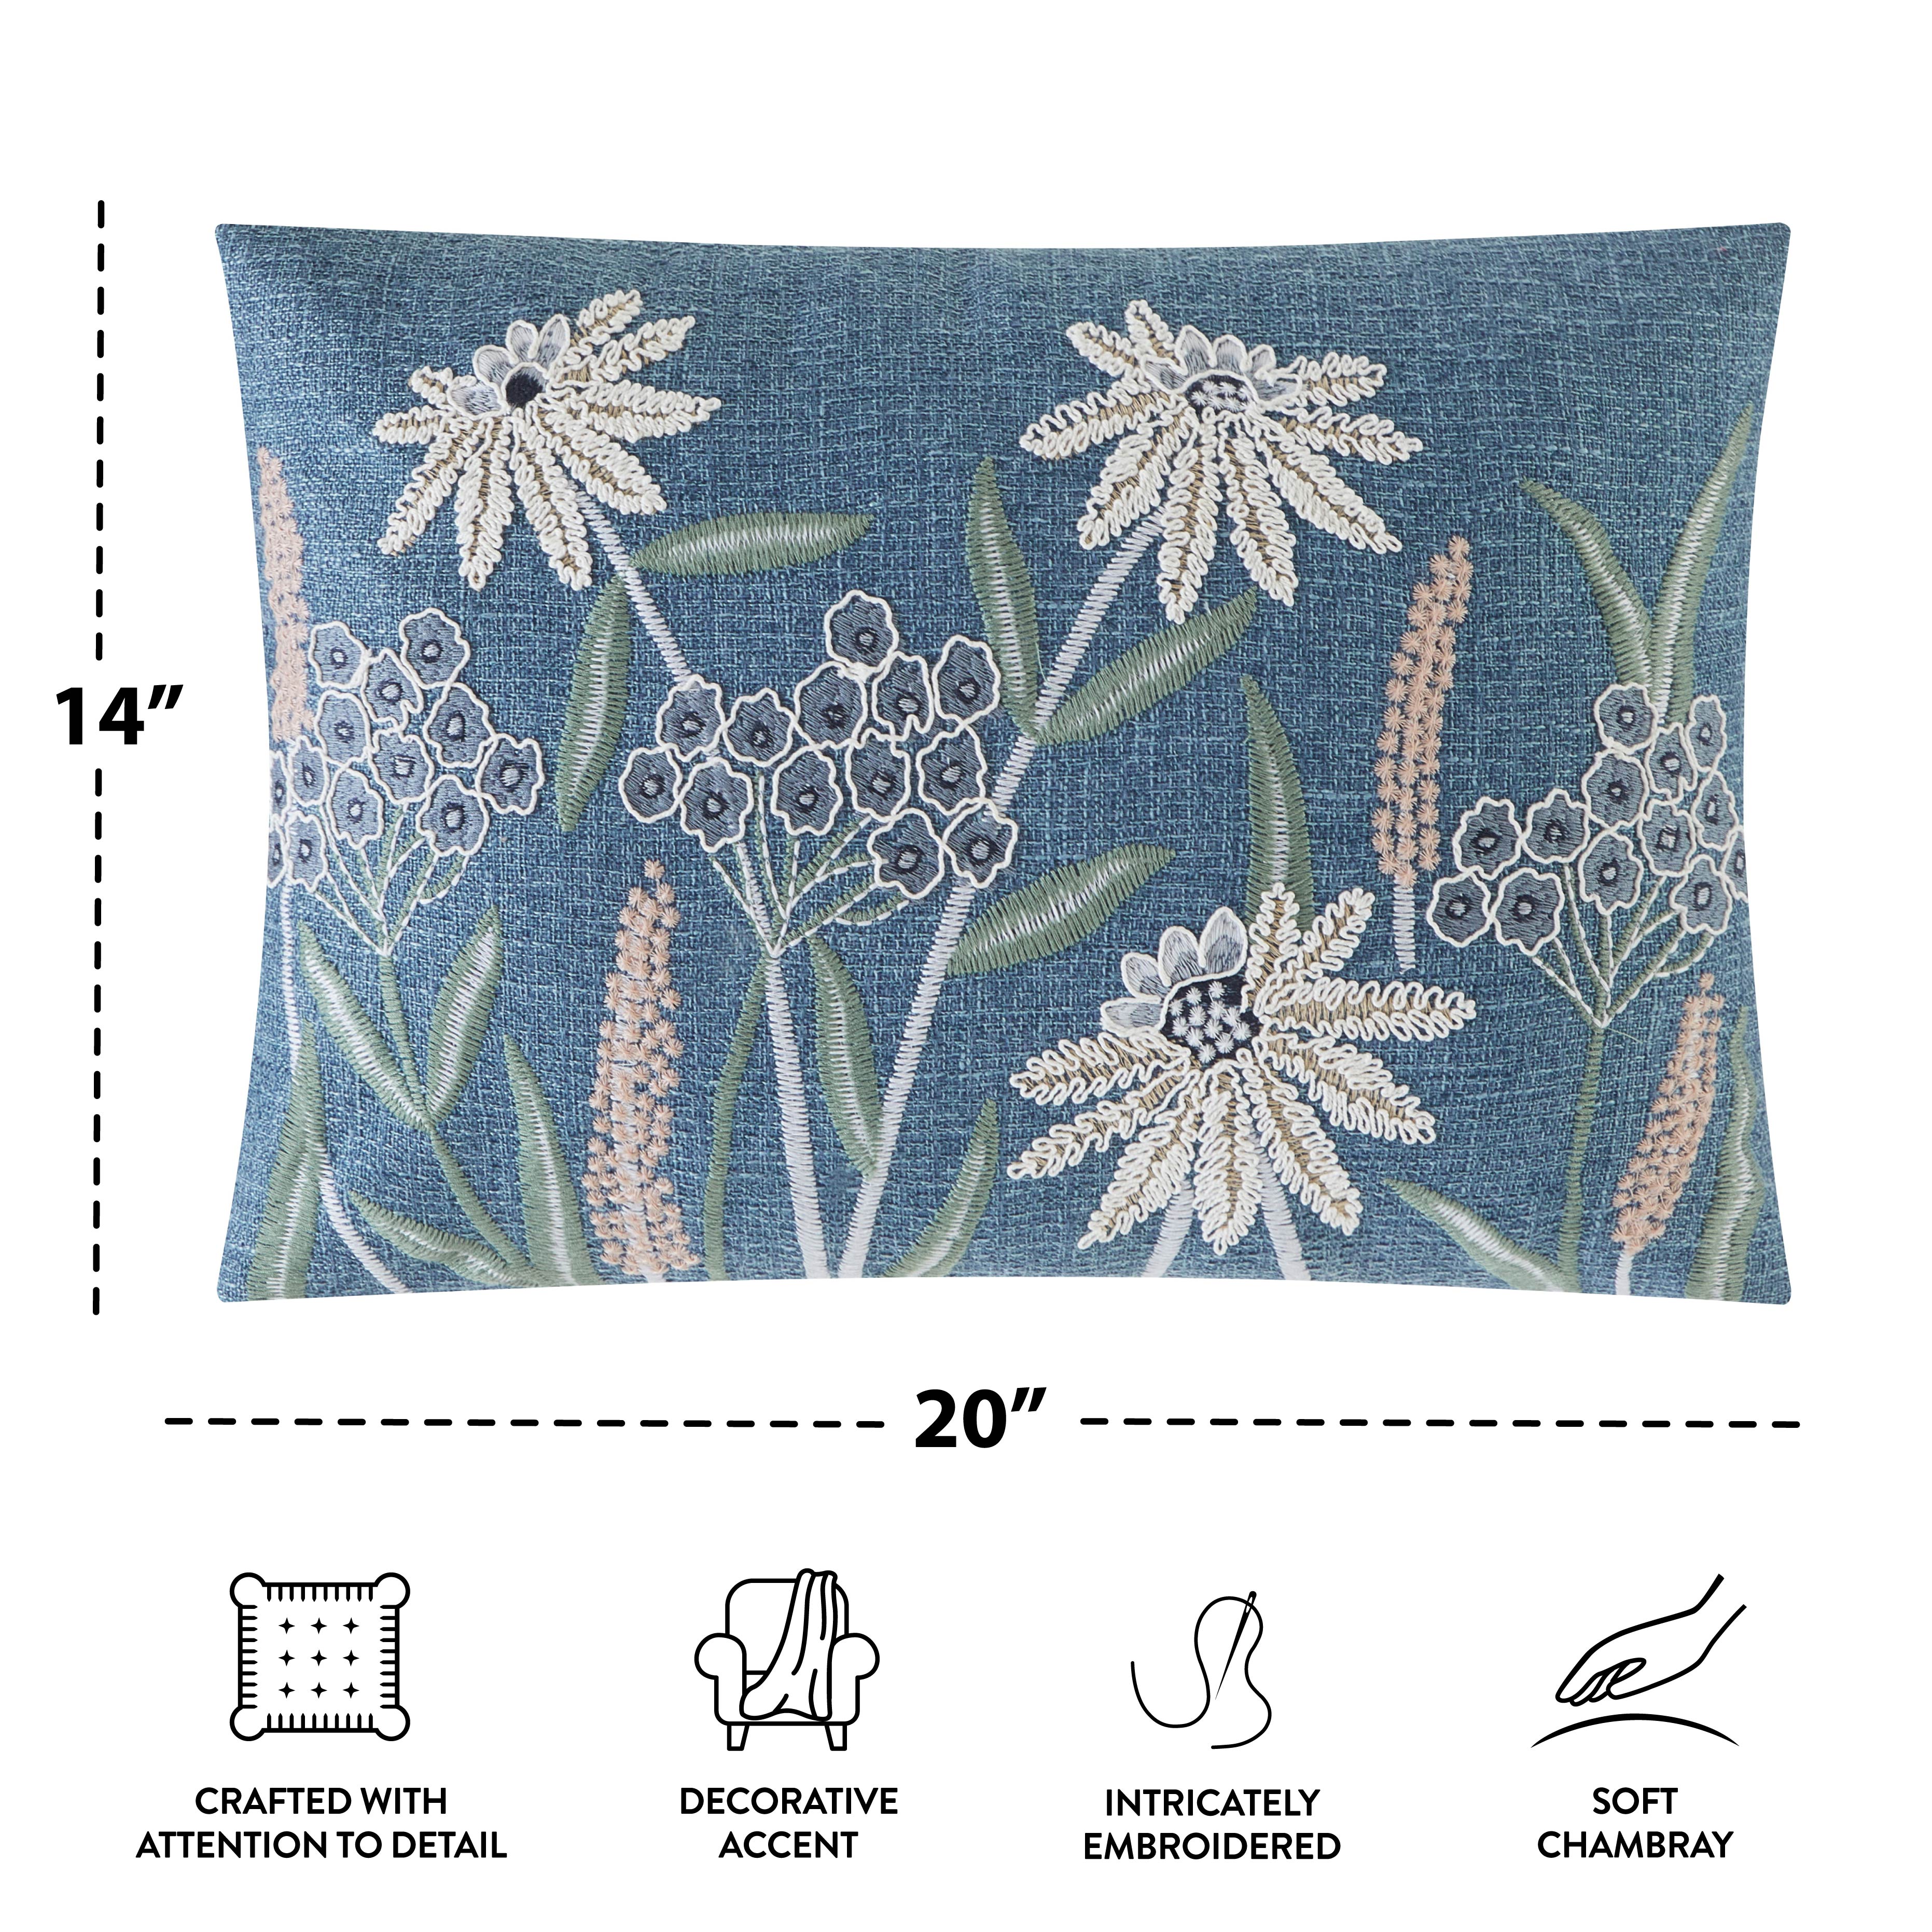 Mainstays Chambray Embroidered Botanical Decorative Pillow 14" x 20" - image 3 of 7